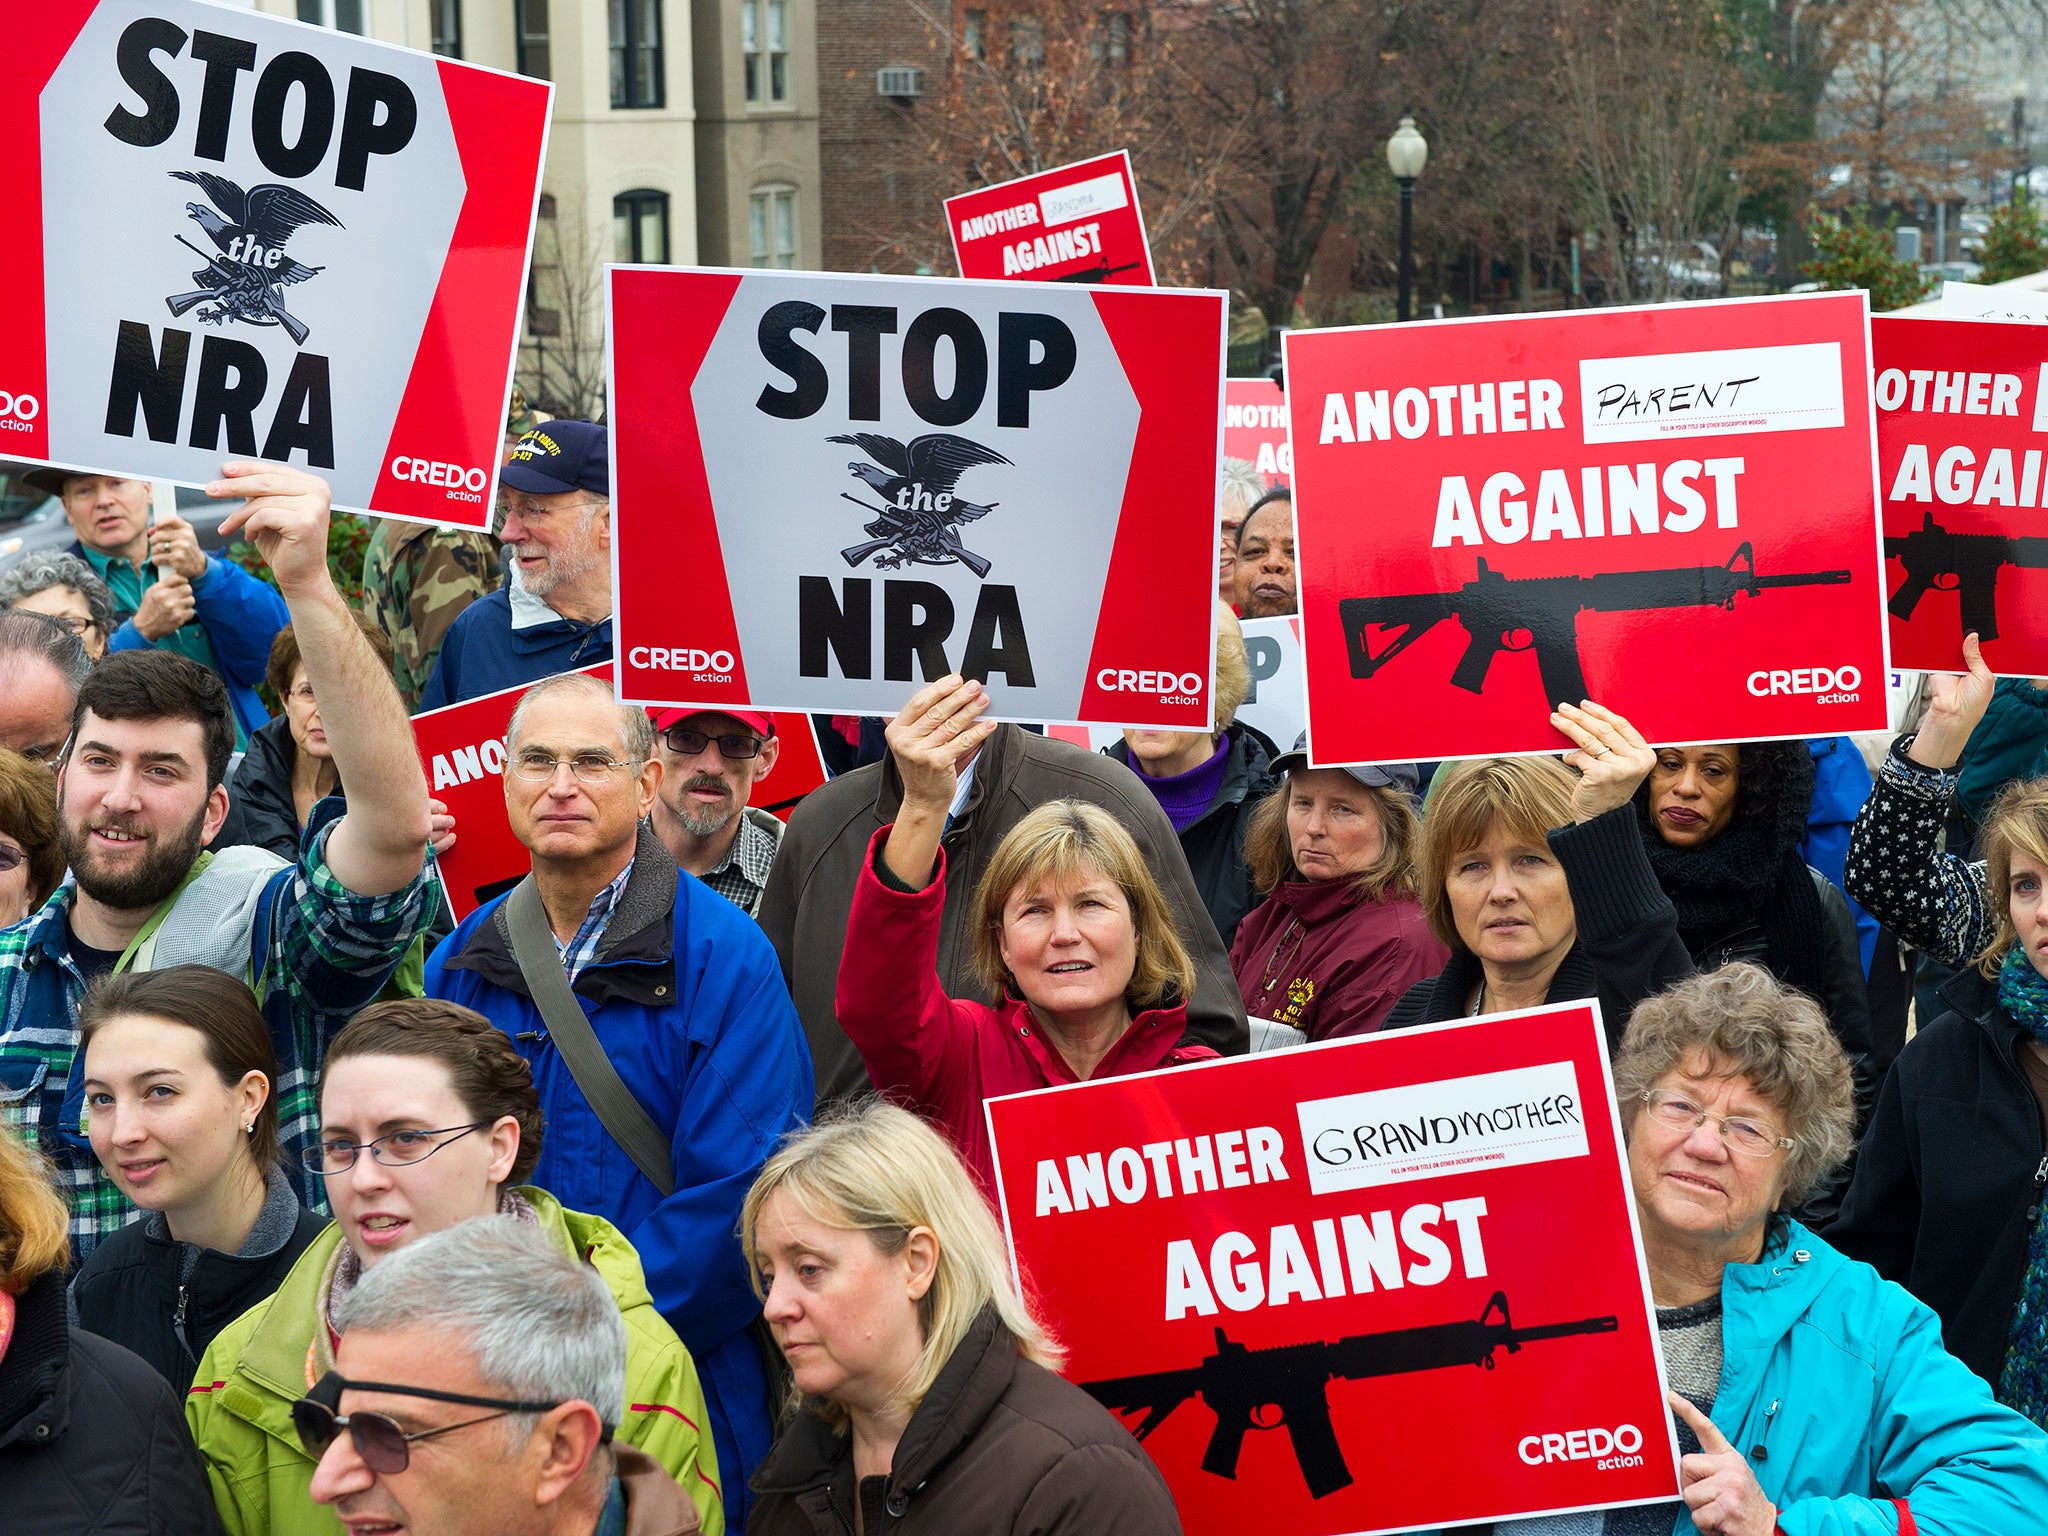 The NRA is frequently targeted with protests by anti-gun campaigners